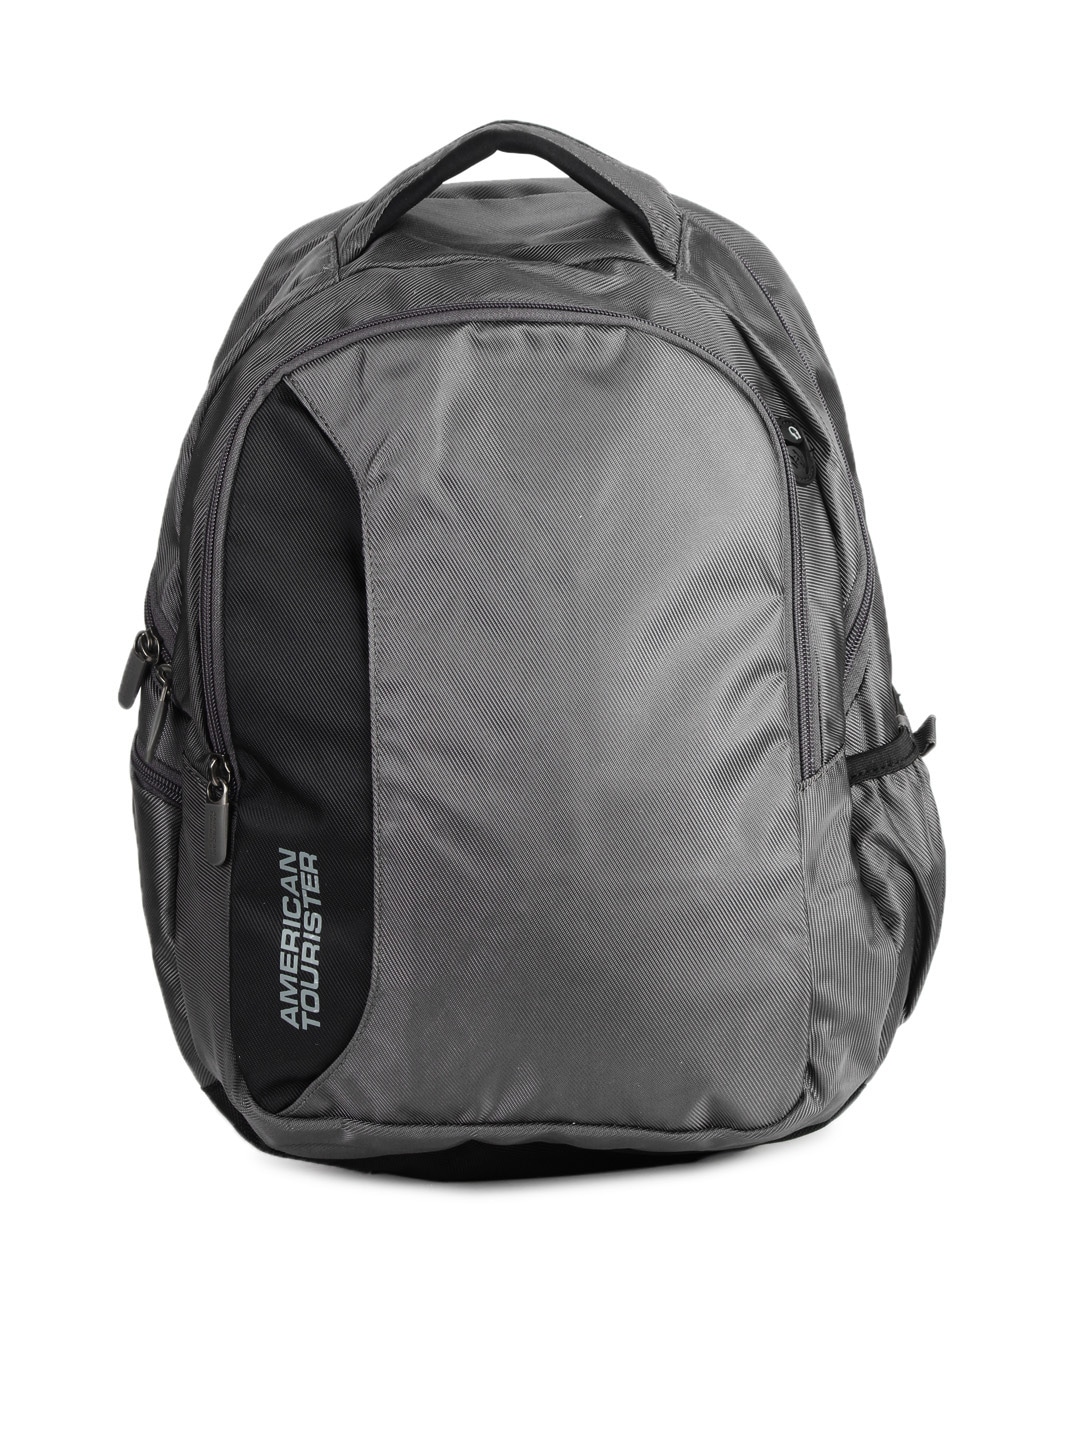 American Tourister Unisex Grey Backpack